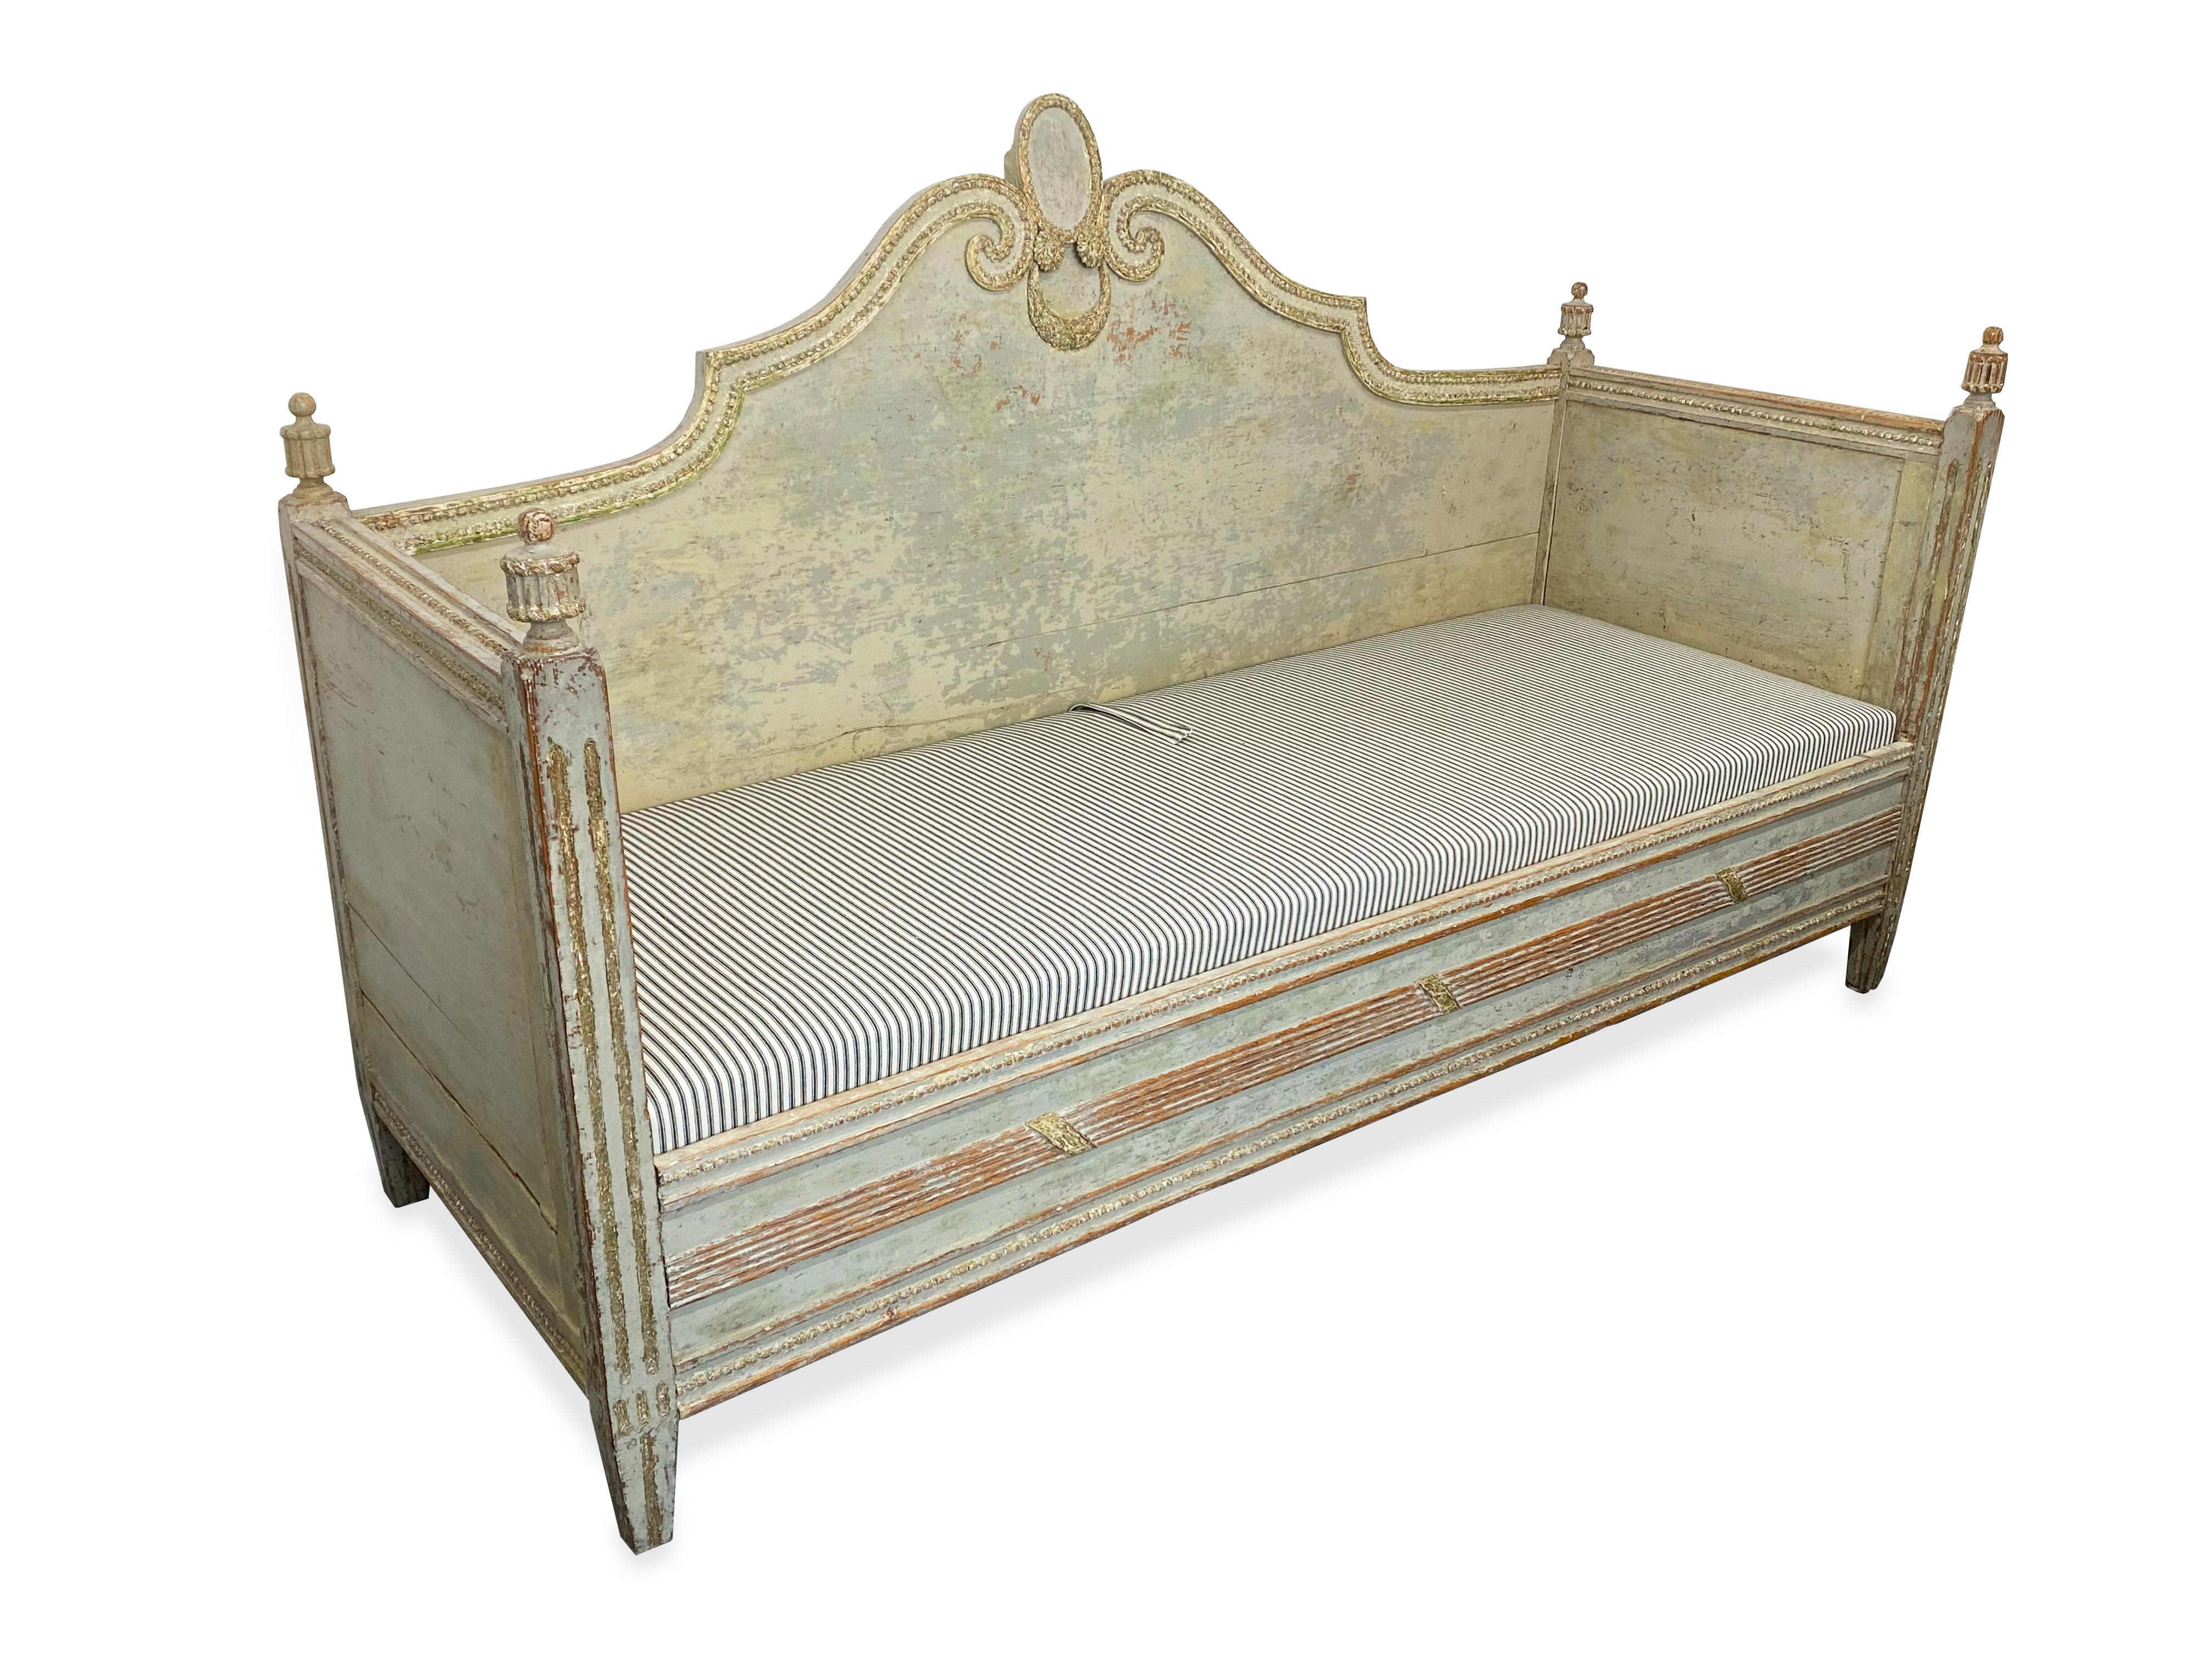 Elegant handcarved Sweedish Gustavian daybed / settee with gilted wood decor along the top edge of the backrest. . An exceptionally rare example of Gustavian workmanship. Circa 1790s. Included with this piece, two upholstered seat cushions that